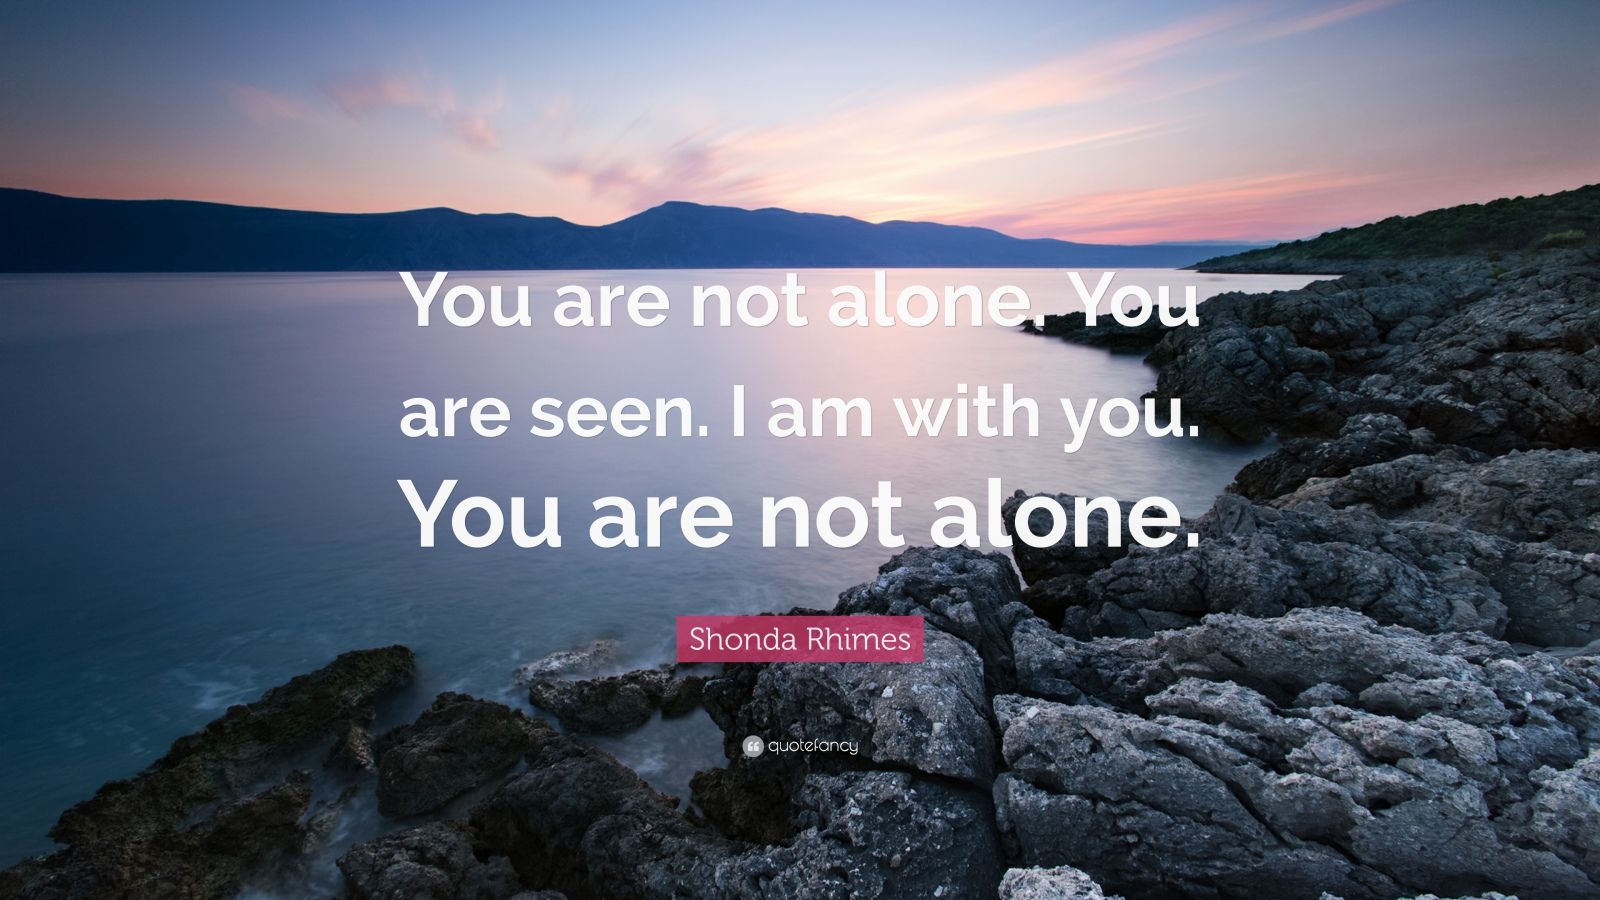 Shonda Rhimes Quote: “You are not alone. You are seen. I ...